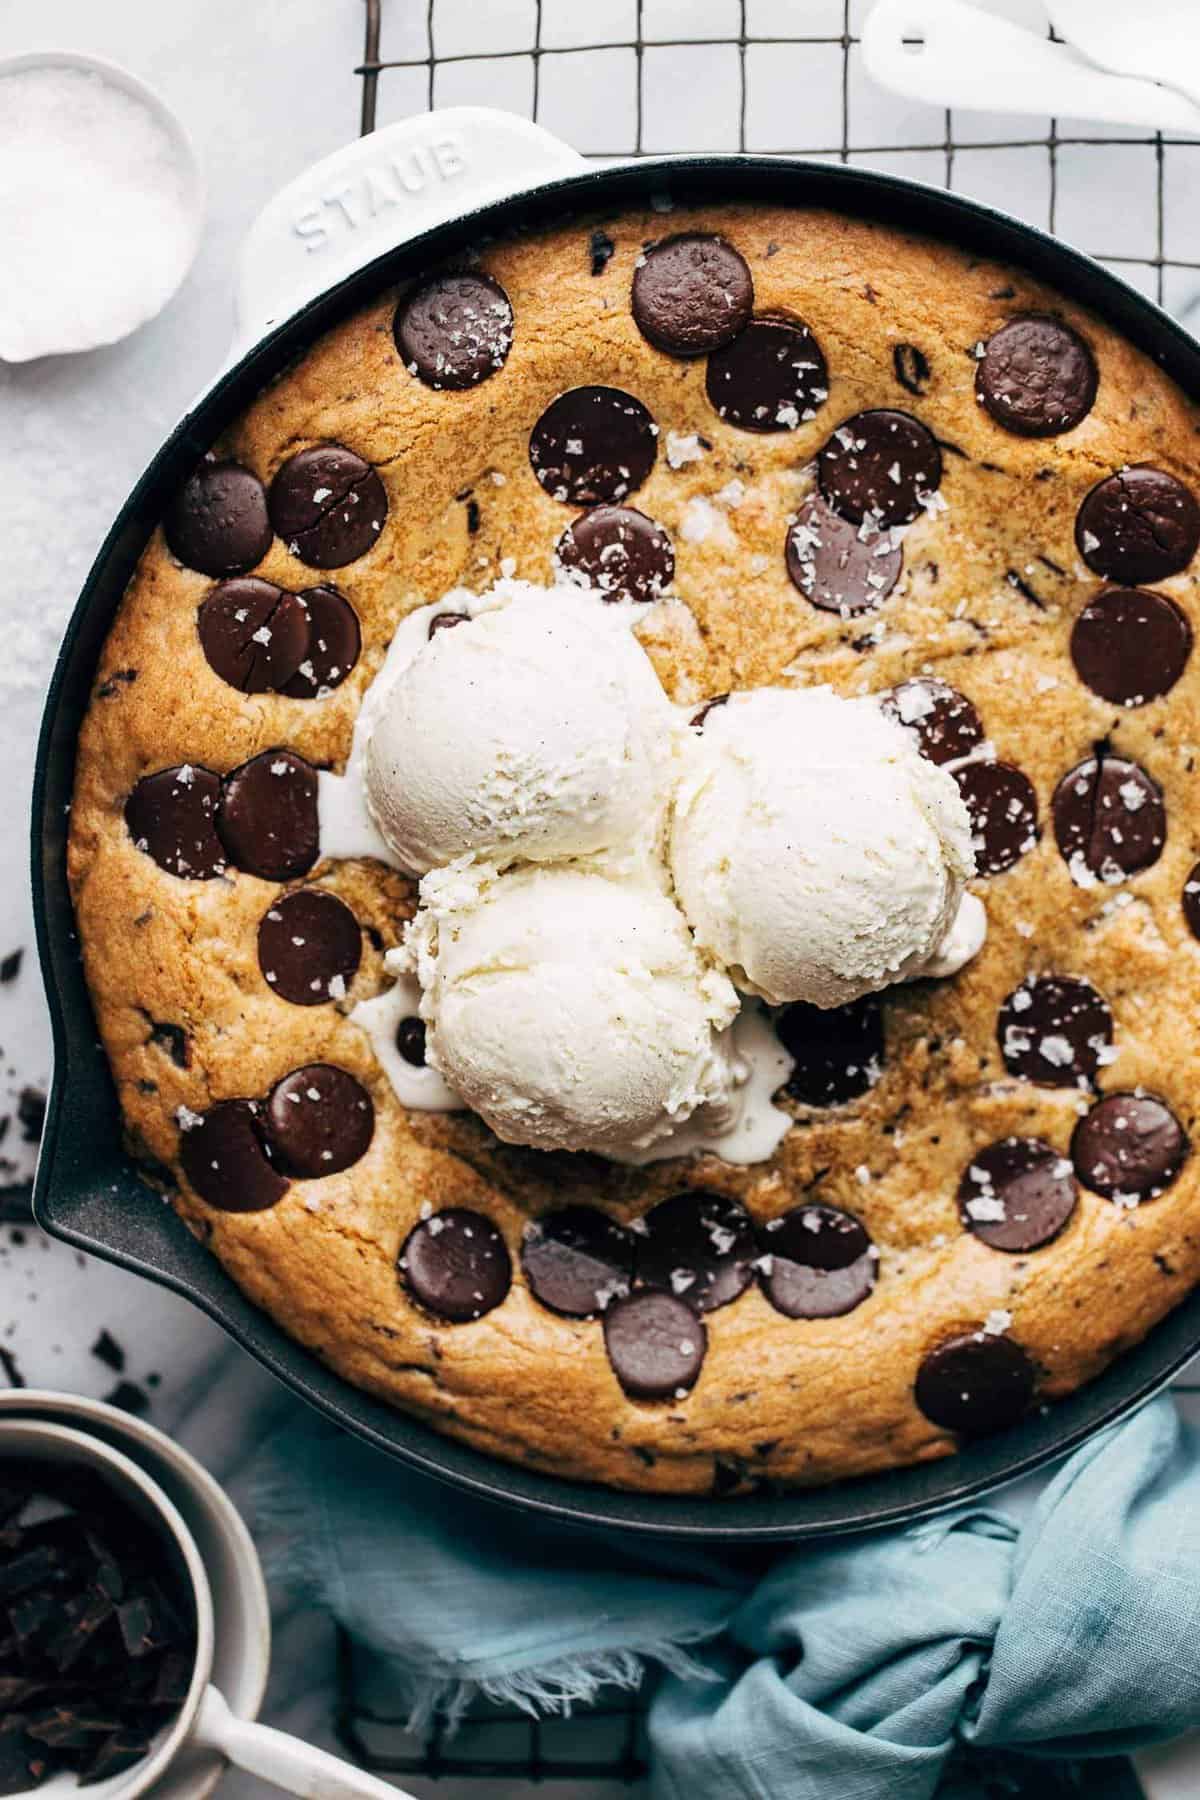 Ooey gooey chocolate chip skillet cookie - The House & Homestead